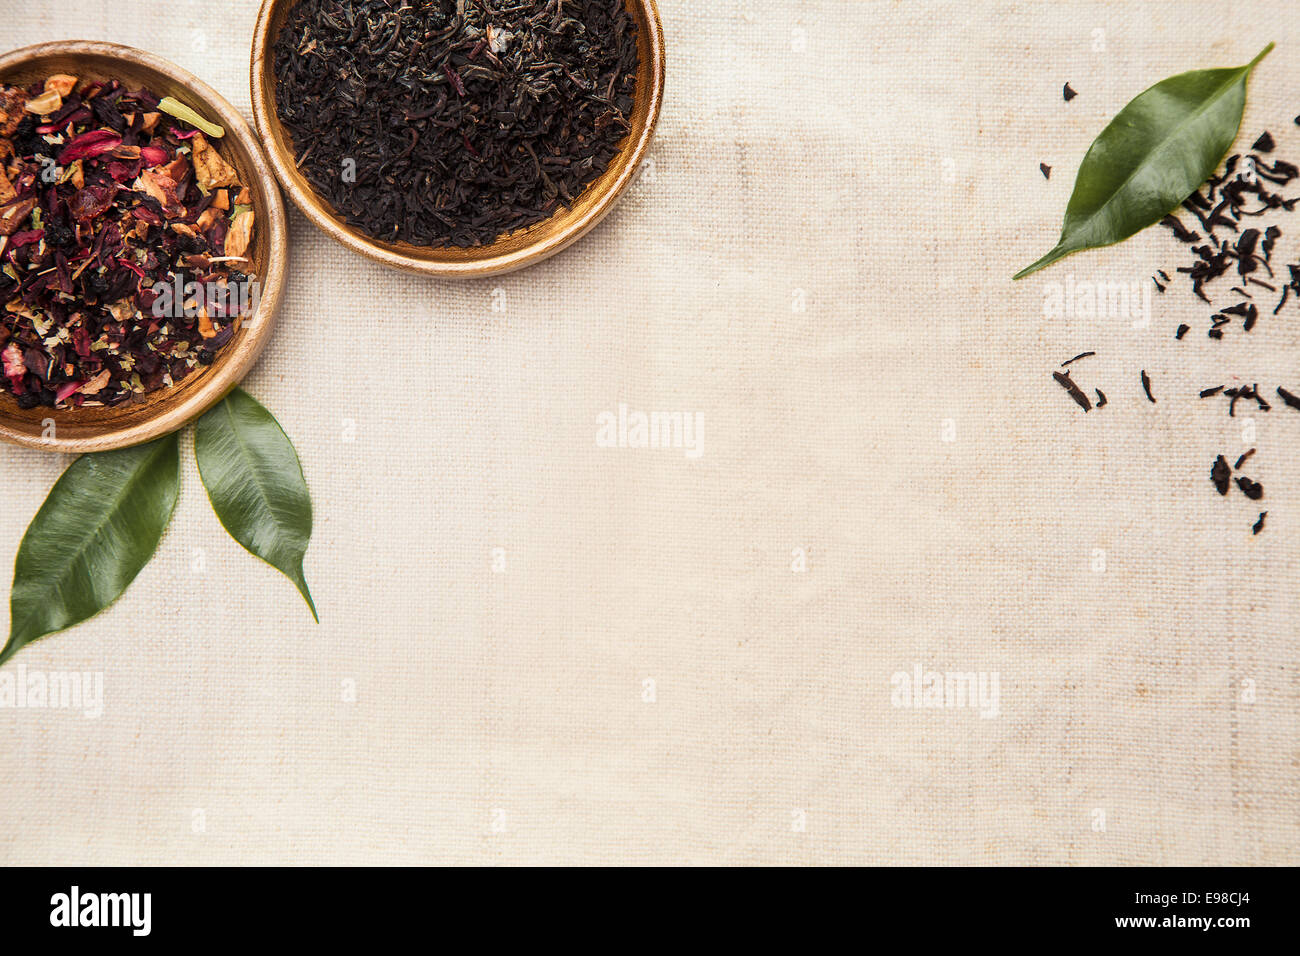 Close-up of dried herbs, aromatic plants and green leaves, used for their healing effects in traditional Chinese medicine Stock Photo